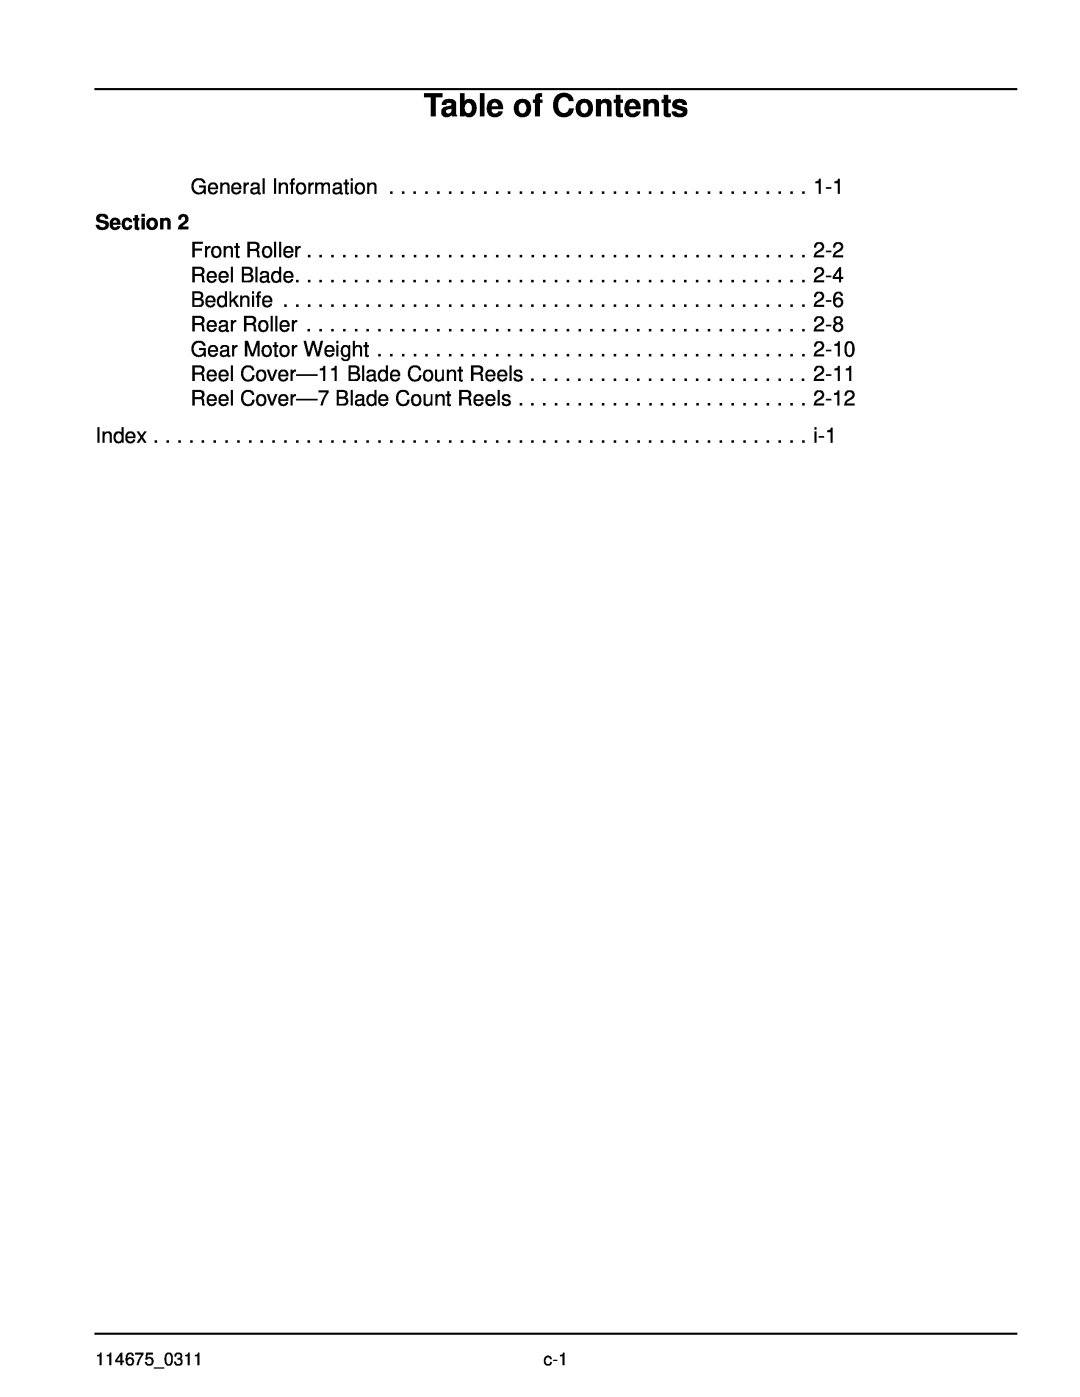 Hustler Turf 114675_0311 C-1 manual Table of Contents, Section 